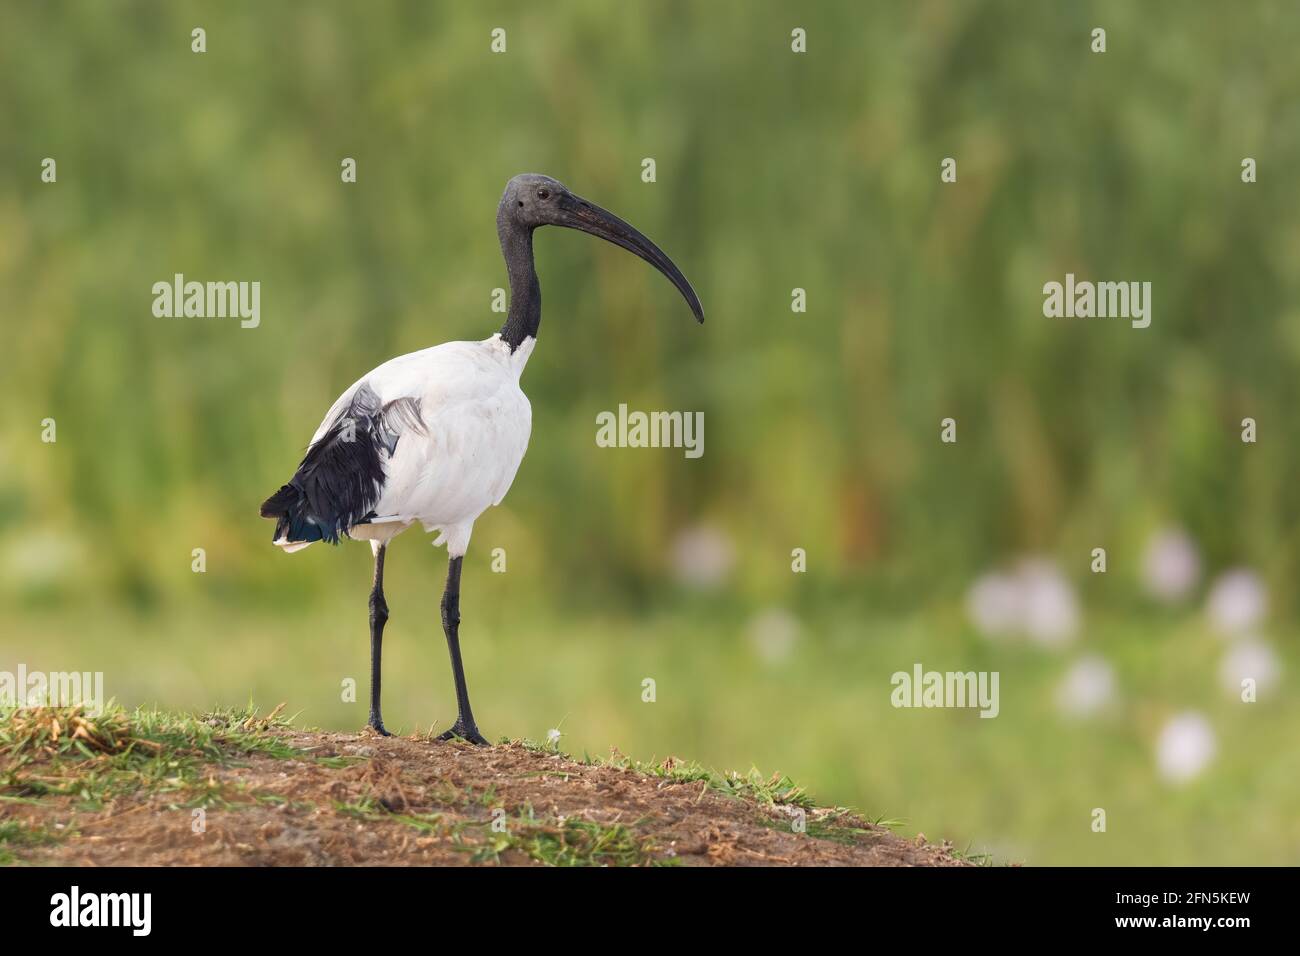 Sacred Ibis - Threskiornis aethiopicus, beautiful black and white ibis from African fields and meadows, lake Ziway, Ethiopia. Stock Photo